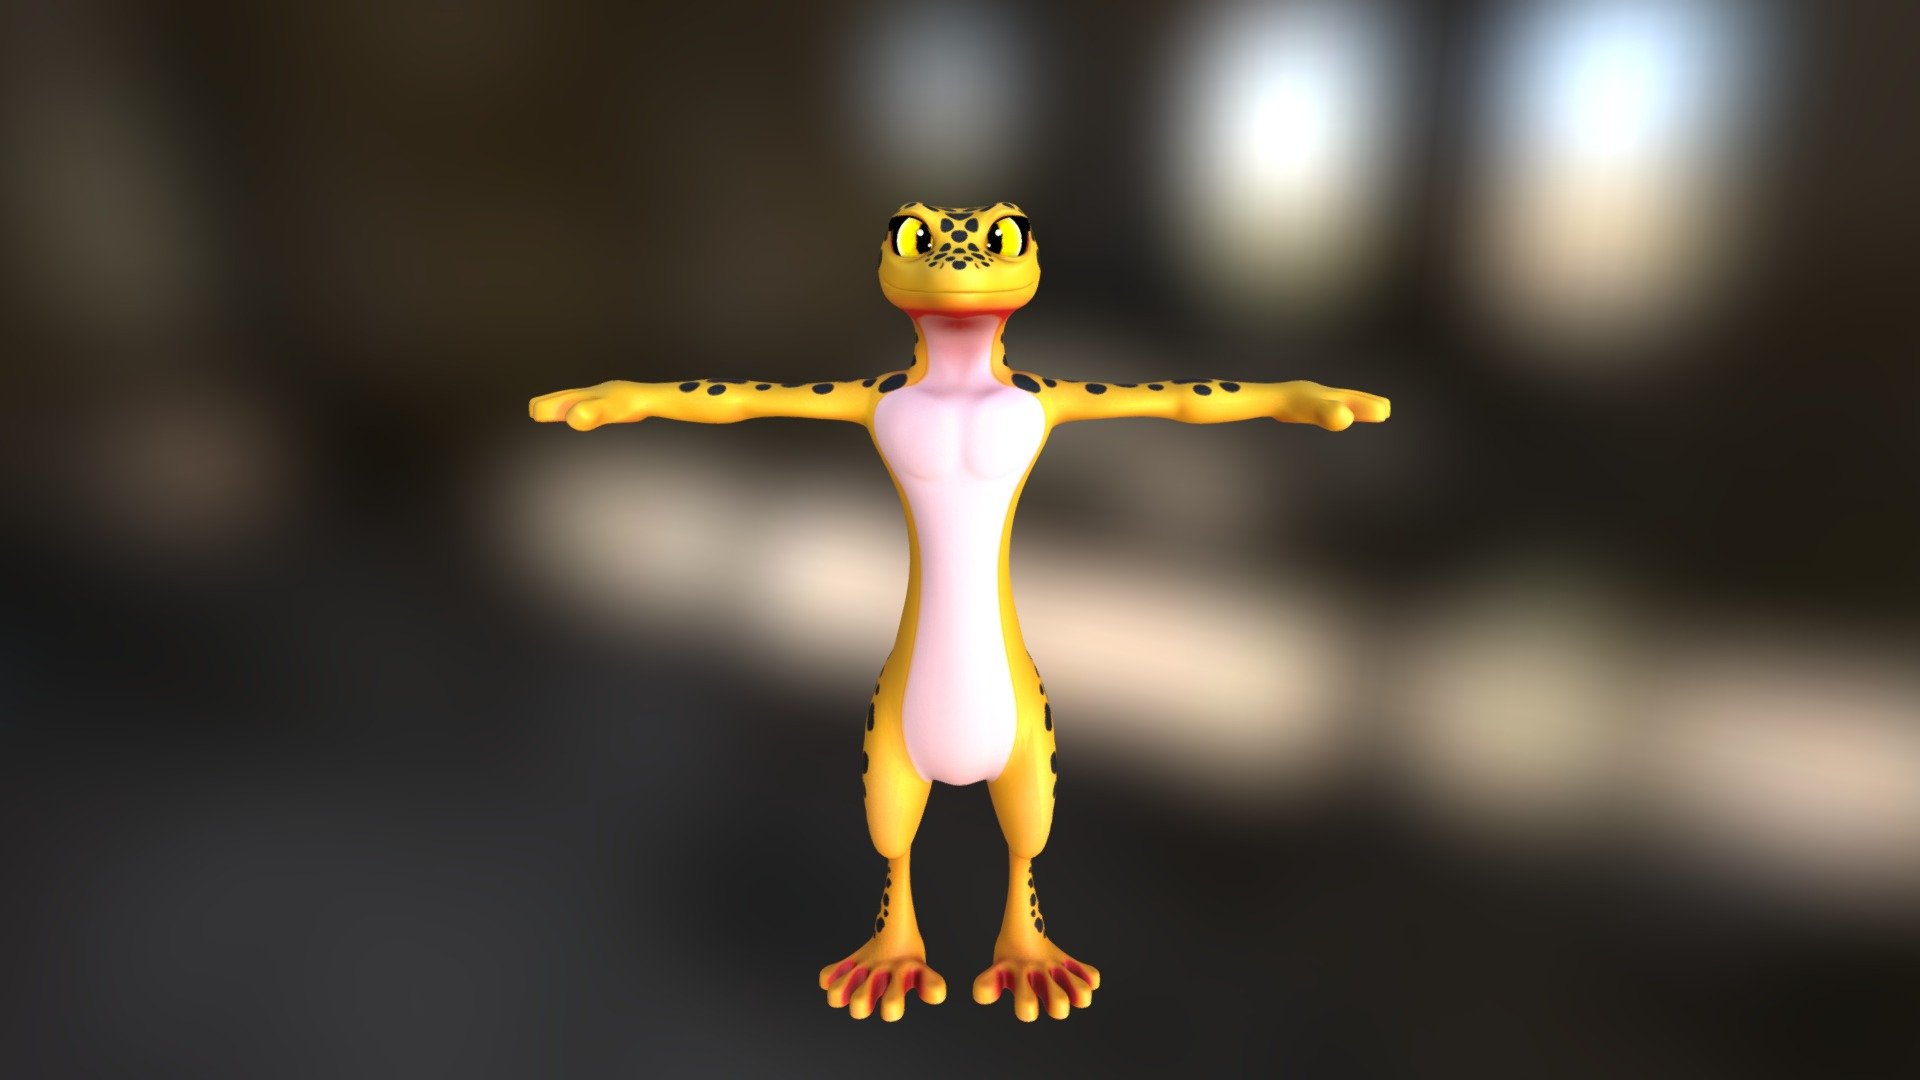 VR ready gecko avatar! Available on Patreon now! https://www.patreon.com/vr_zab after it leaves Patreon, check for it on my Gumroad (vr_zab)! All my links are here: https://linktr.ee/vr_zab

Full body compatible, Quest version included, with High and Low poly PC versions too! - Gecko - VRChat & VTuber Avatar - 3D model by Zab (@lixyco) 3d model